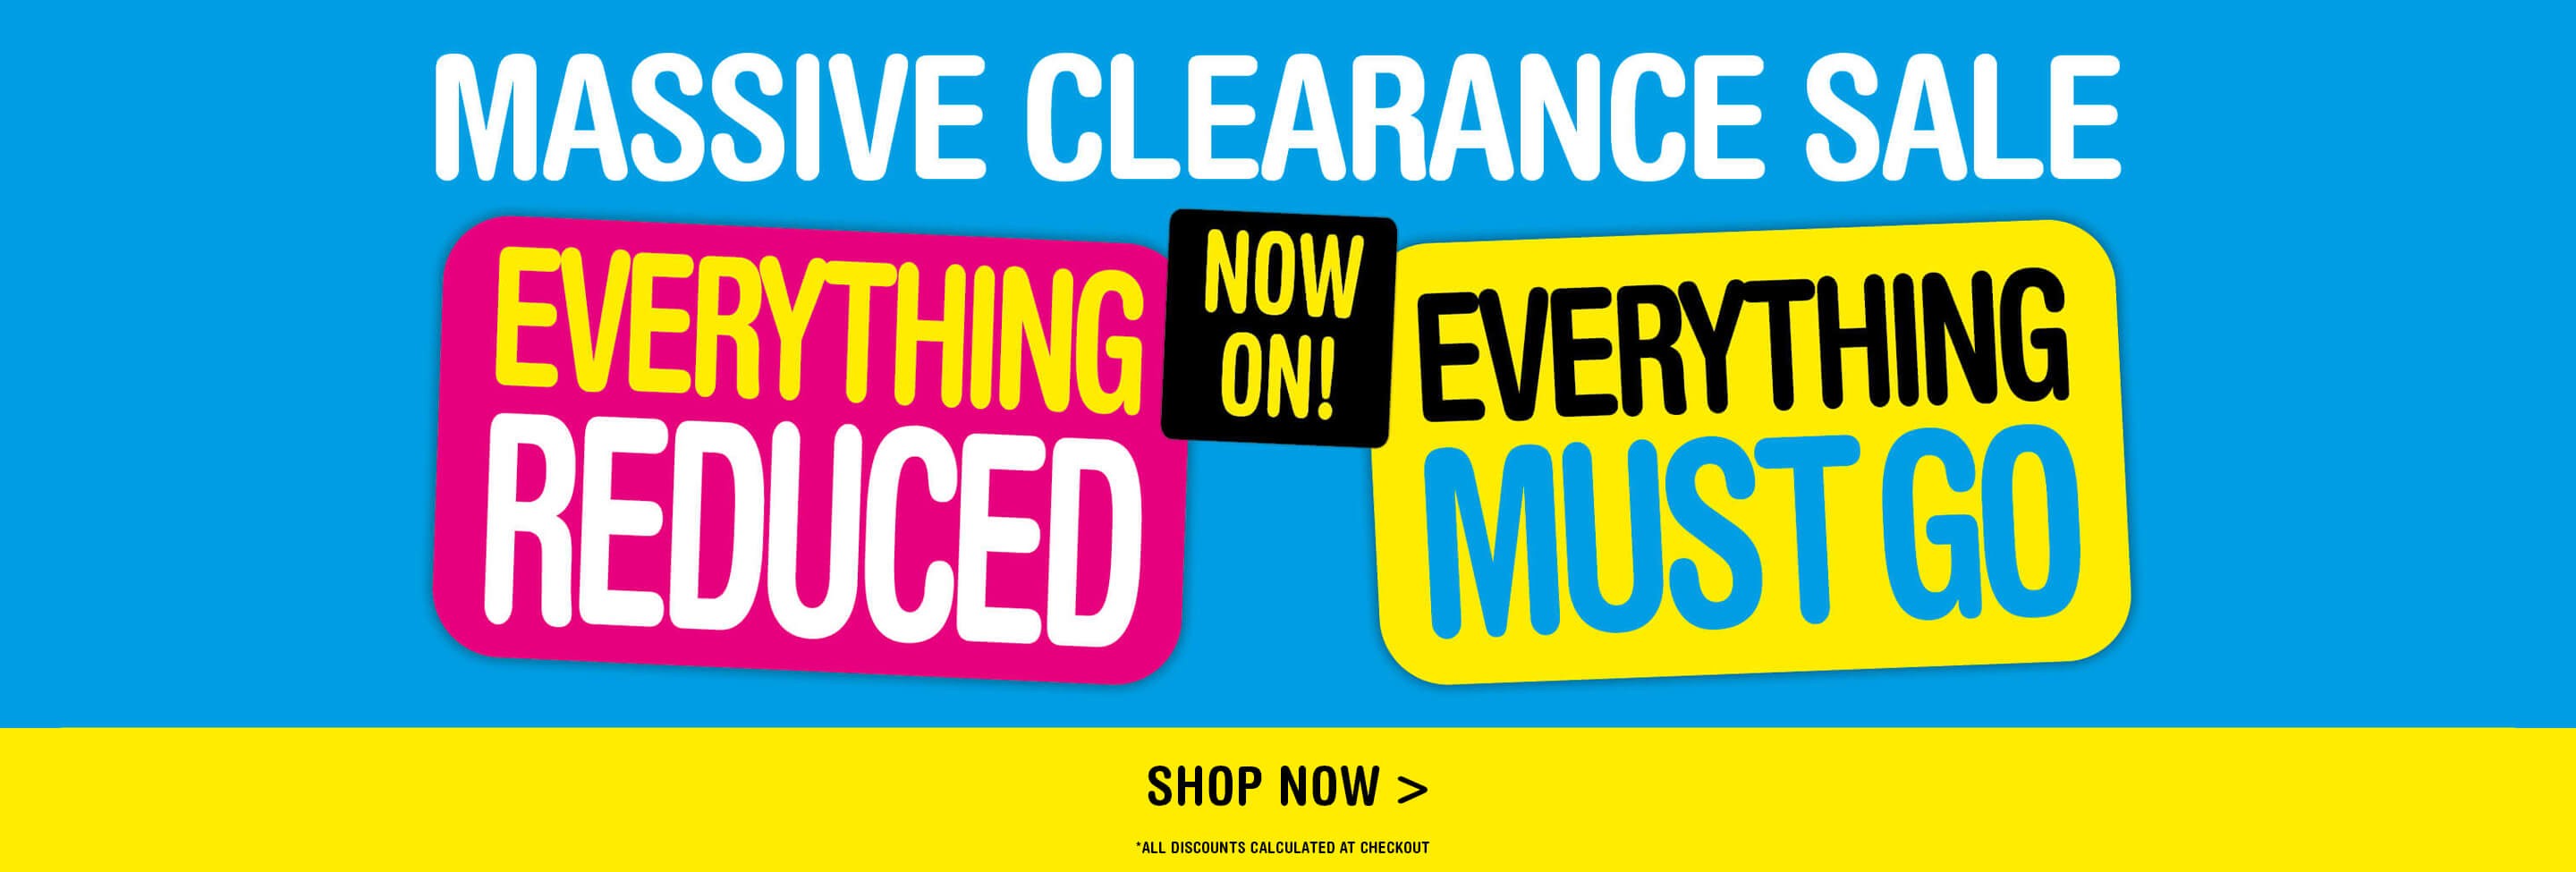 Save up to 50% OFF on Massive clearance sale